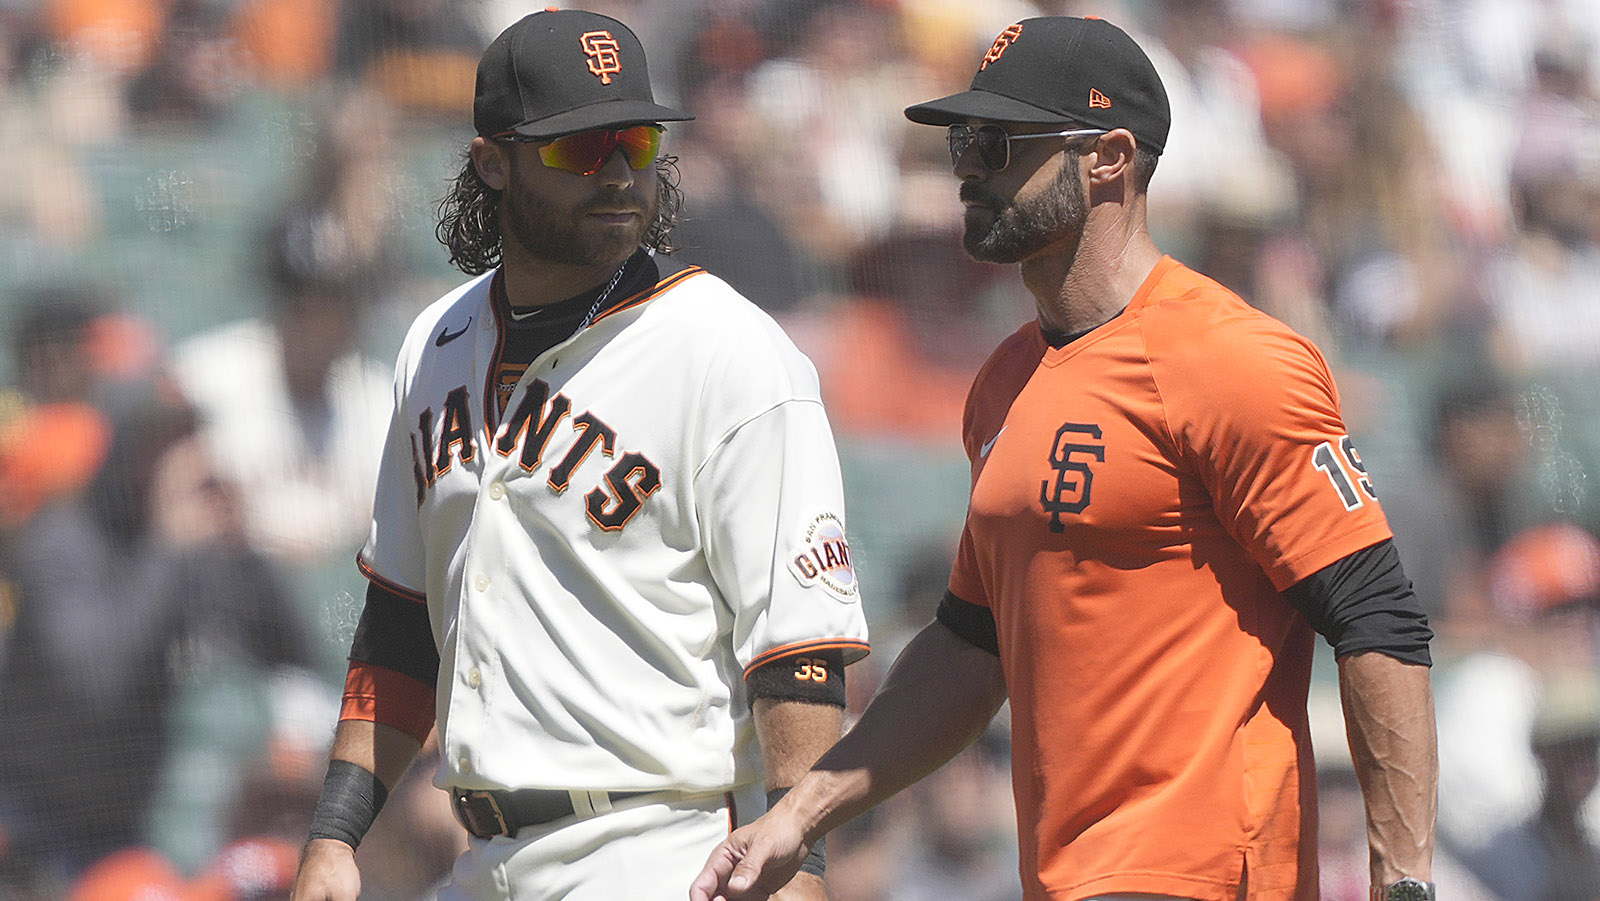 Is Brandon Crawford retiring this year? Exploring shortstop's options after  serving longest run in Giants history